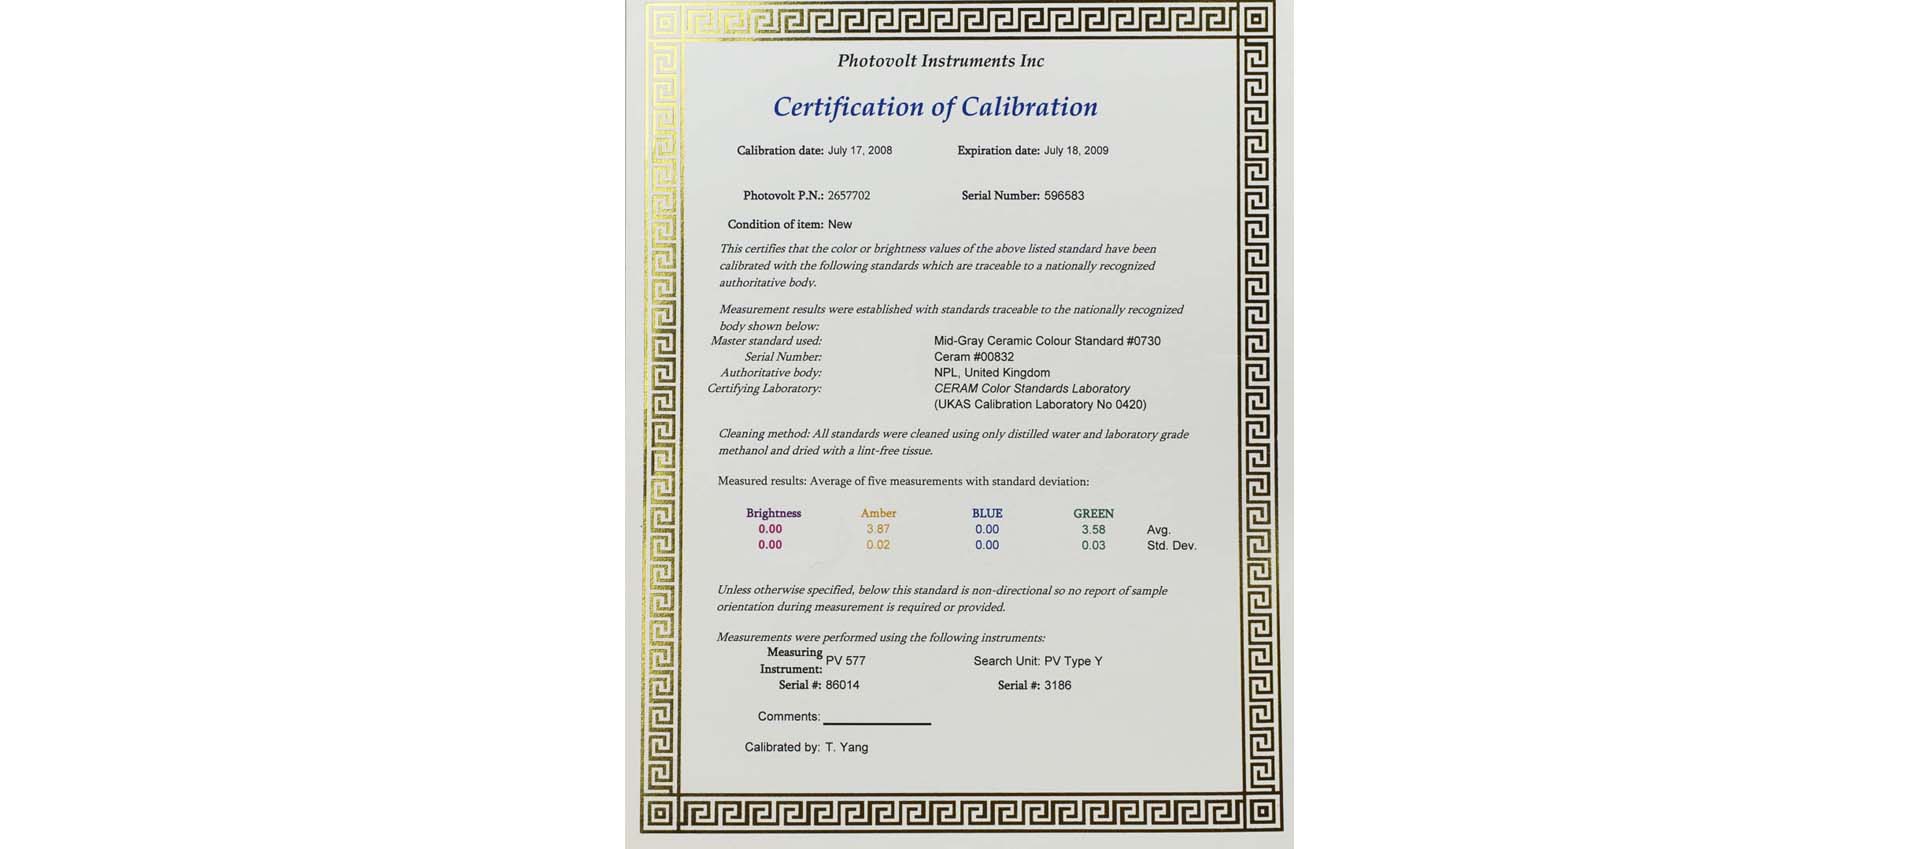 Replacement Certification for Plaque 2657020